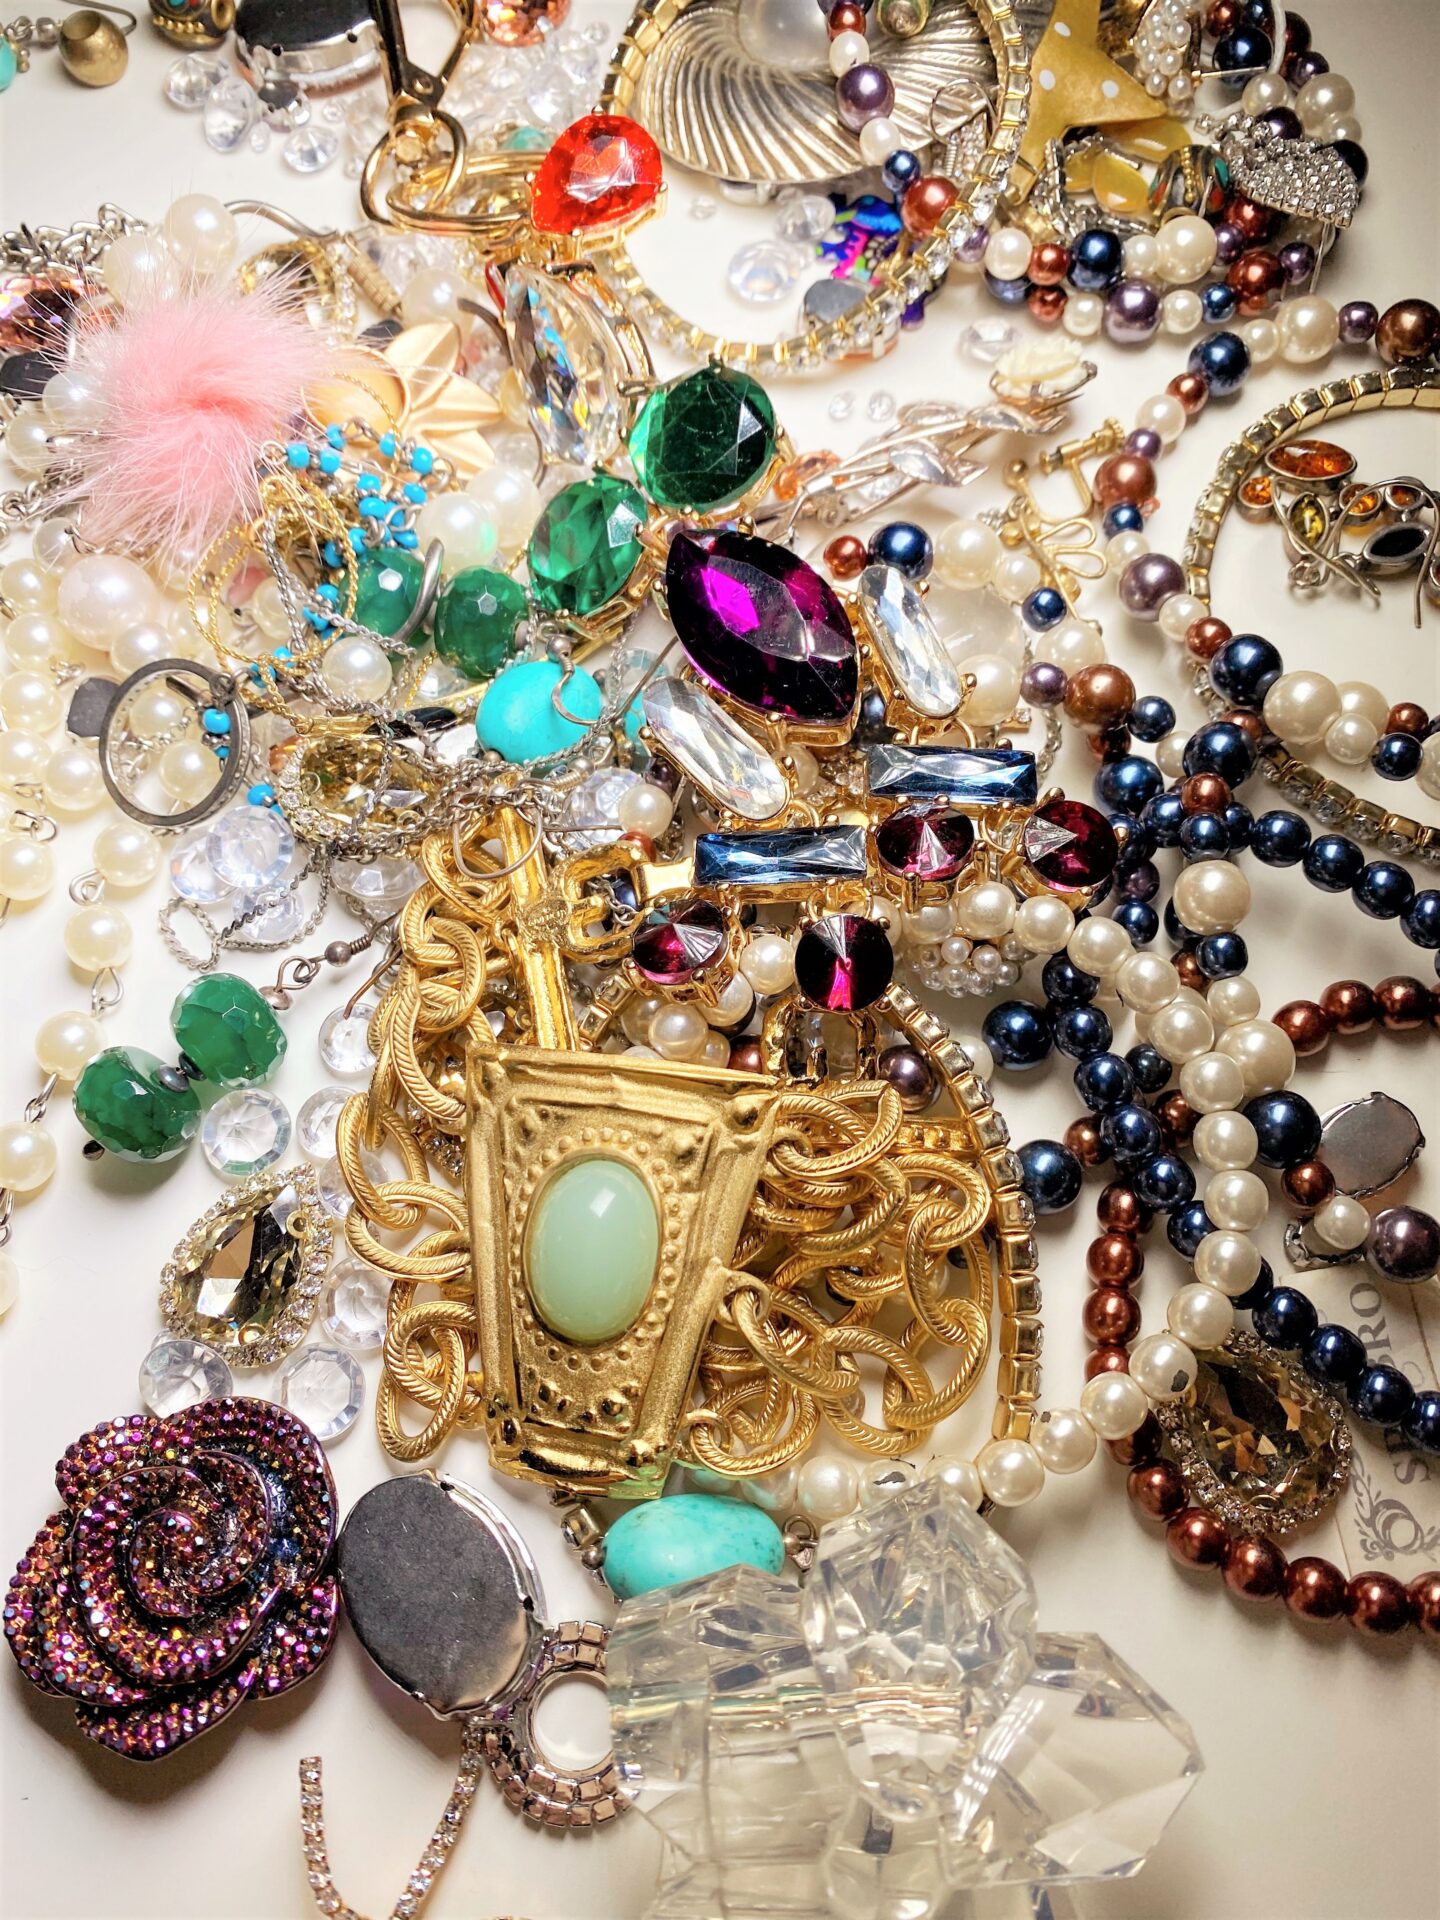 DIY Framed Jewelry Christmas Tree: use old broken mismatched vintage costume jewelry